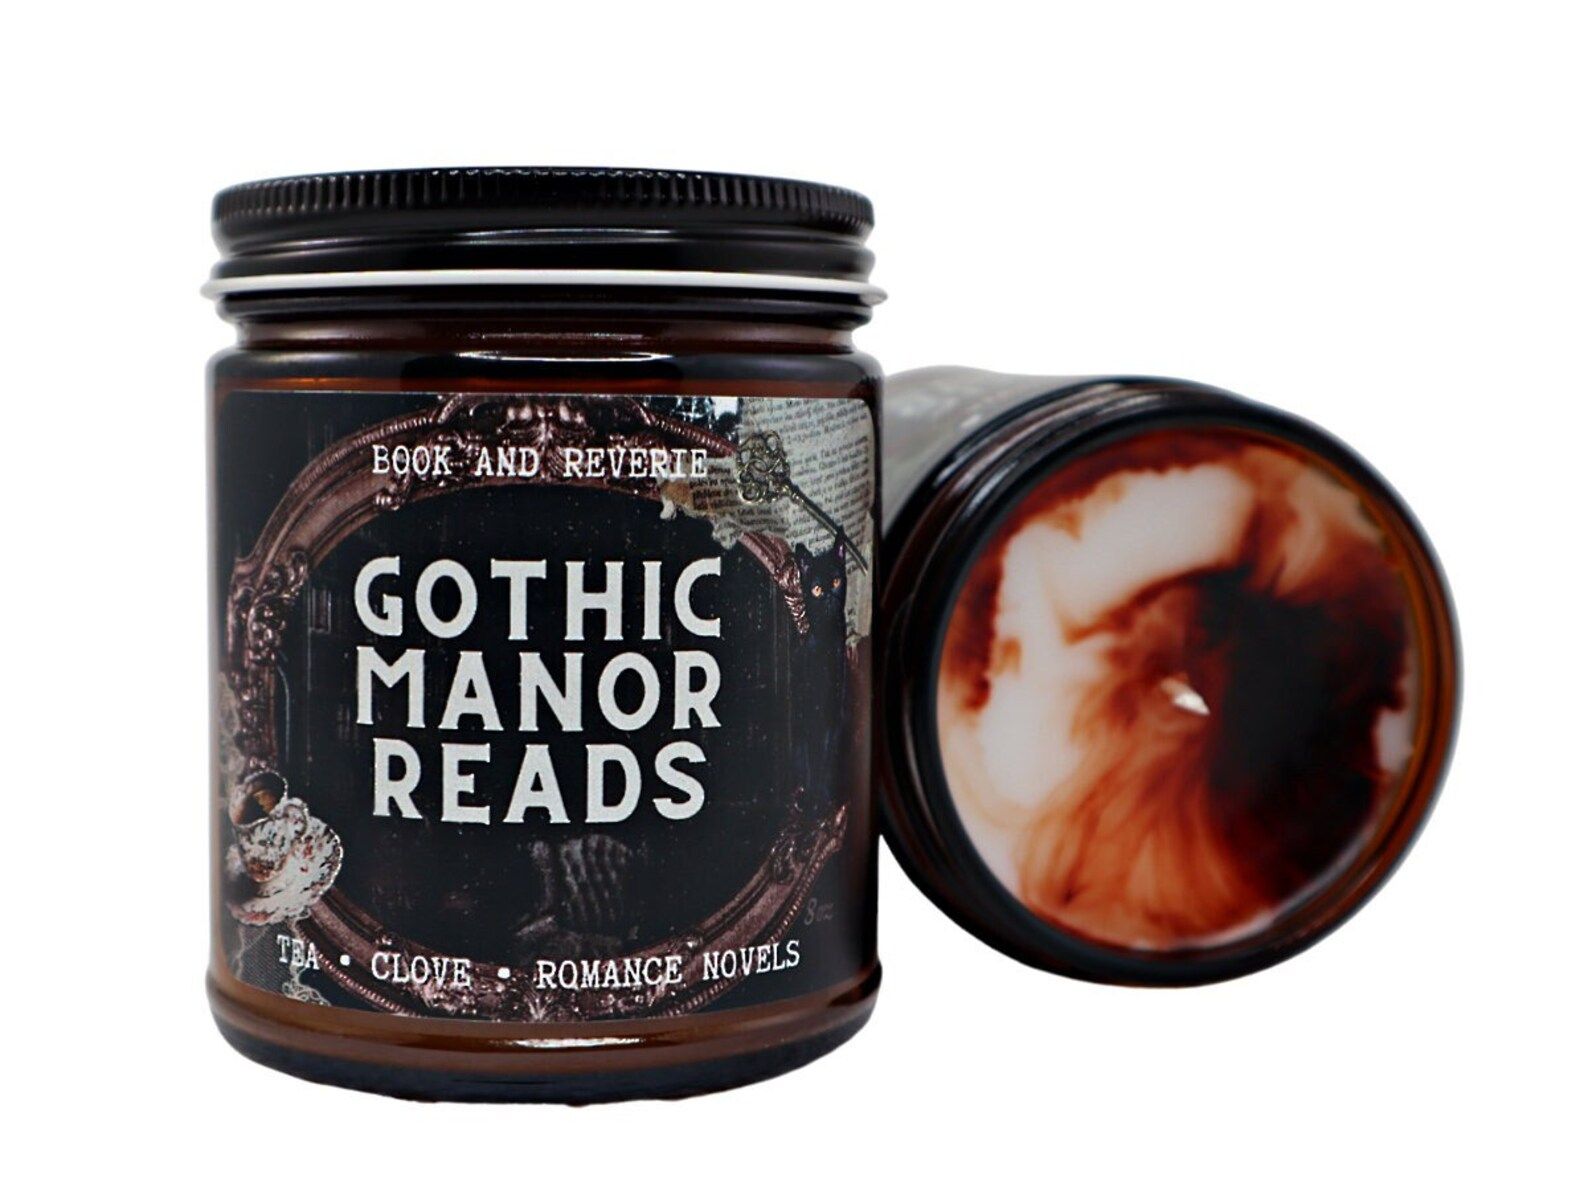 a candle with a label saying "Gothic Manor Reads" and the scents "tea, clove, romance novels"